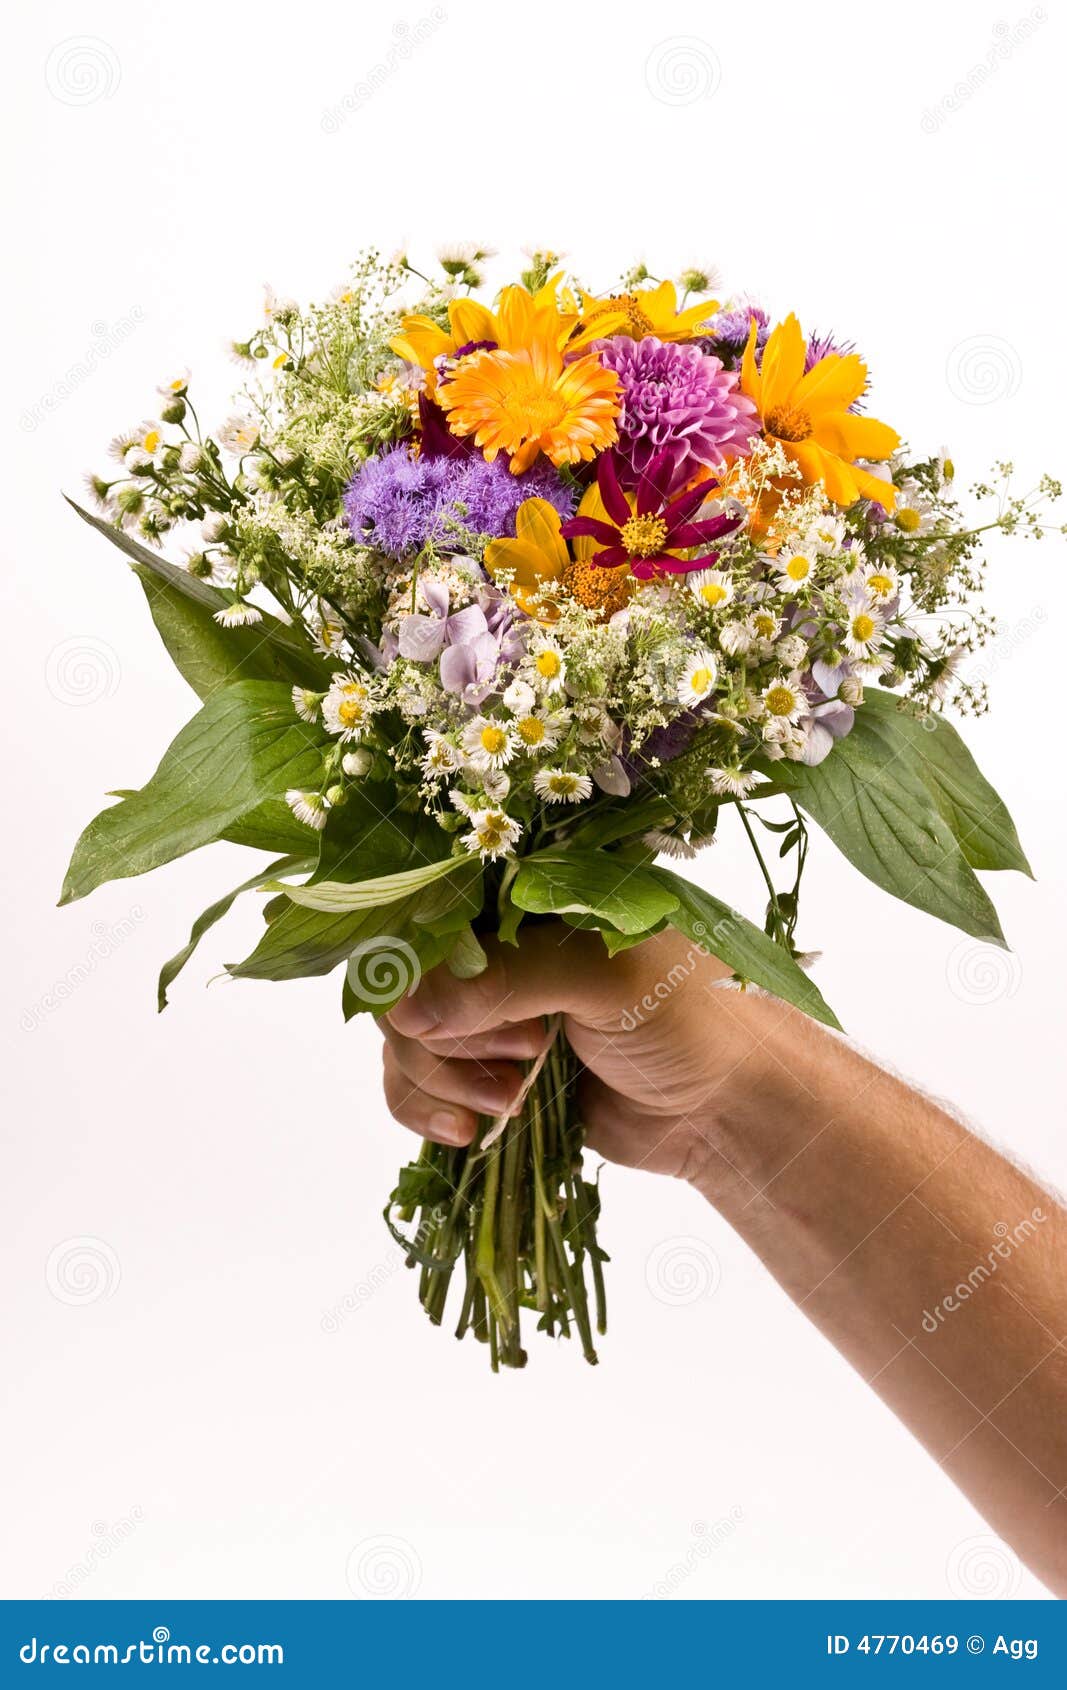 Royalty Free Stock Images: Bunch of flowers